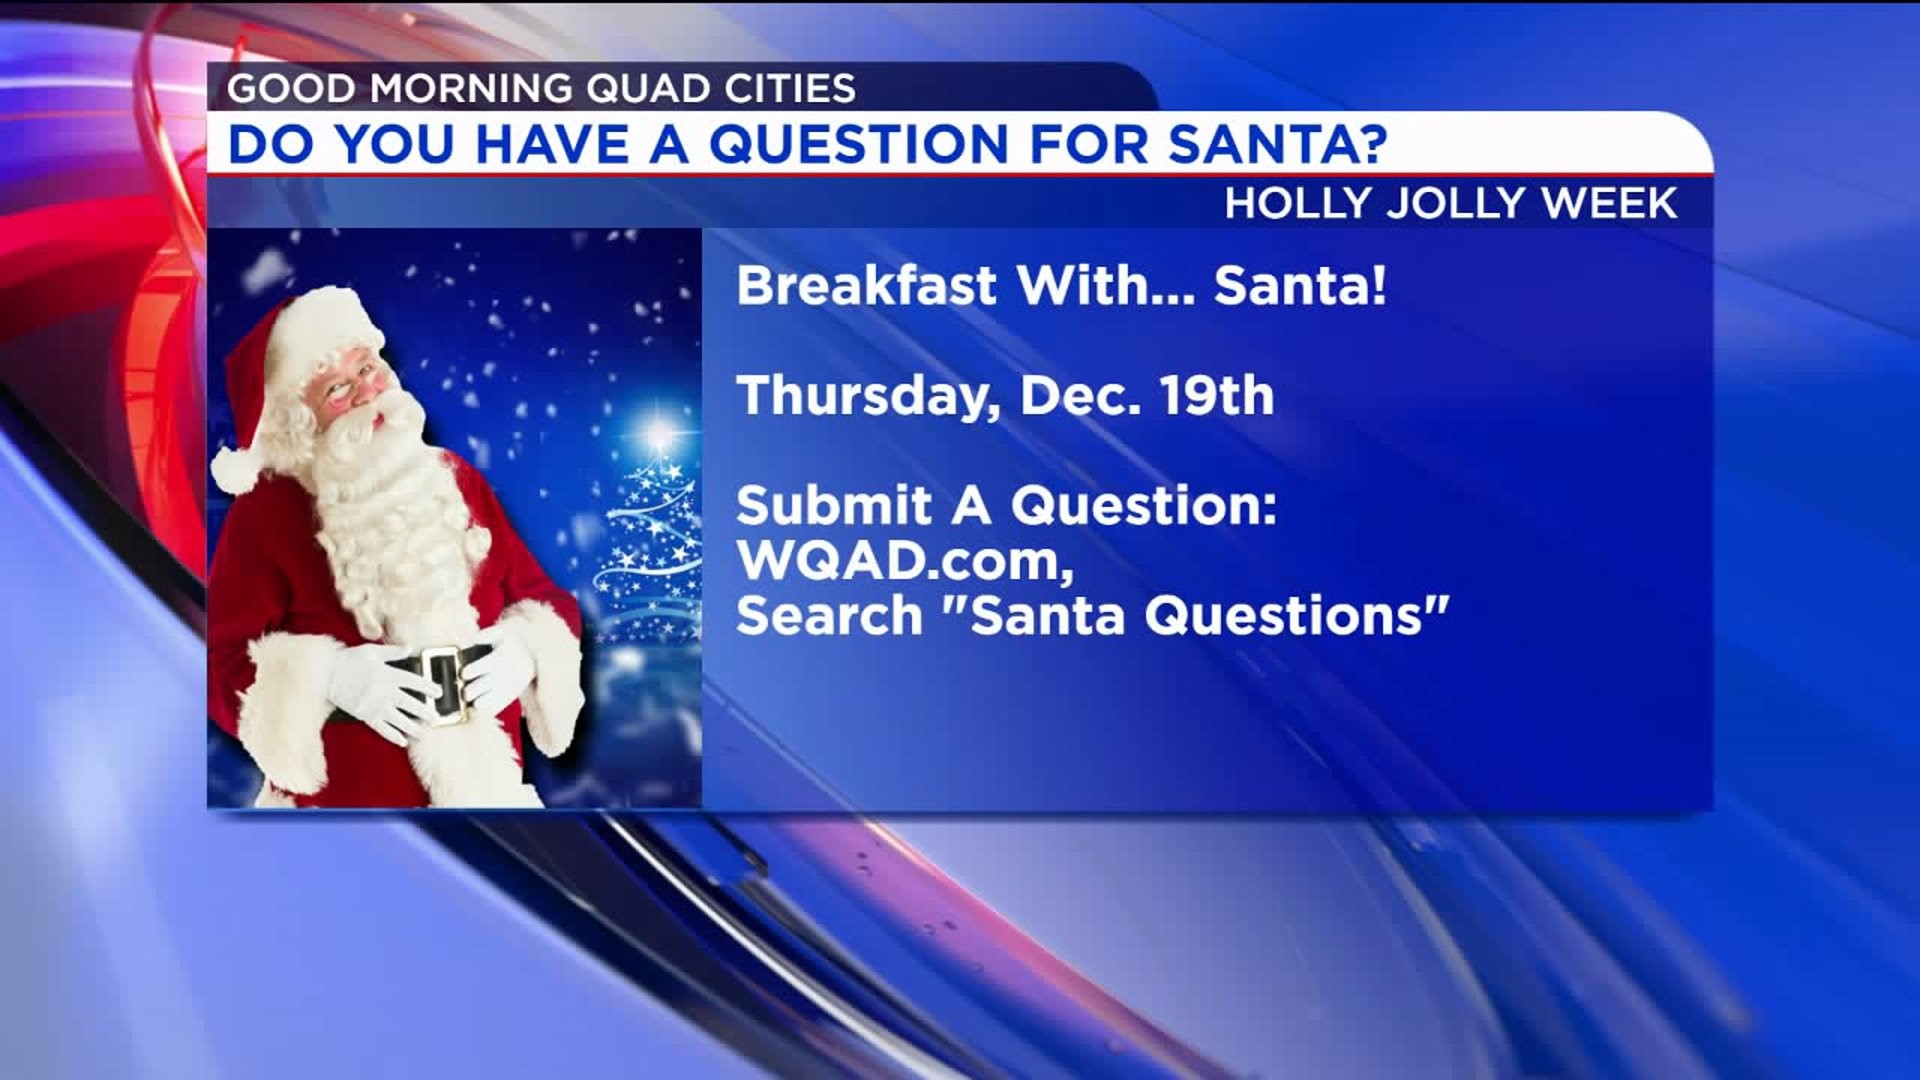 What`s your question for Santa?